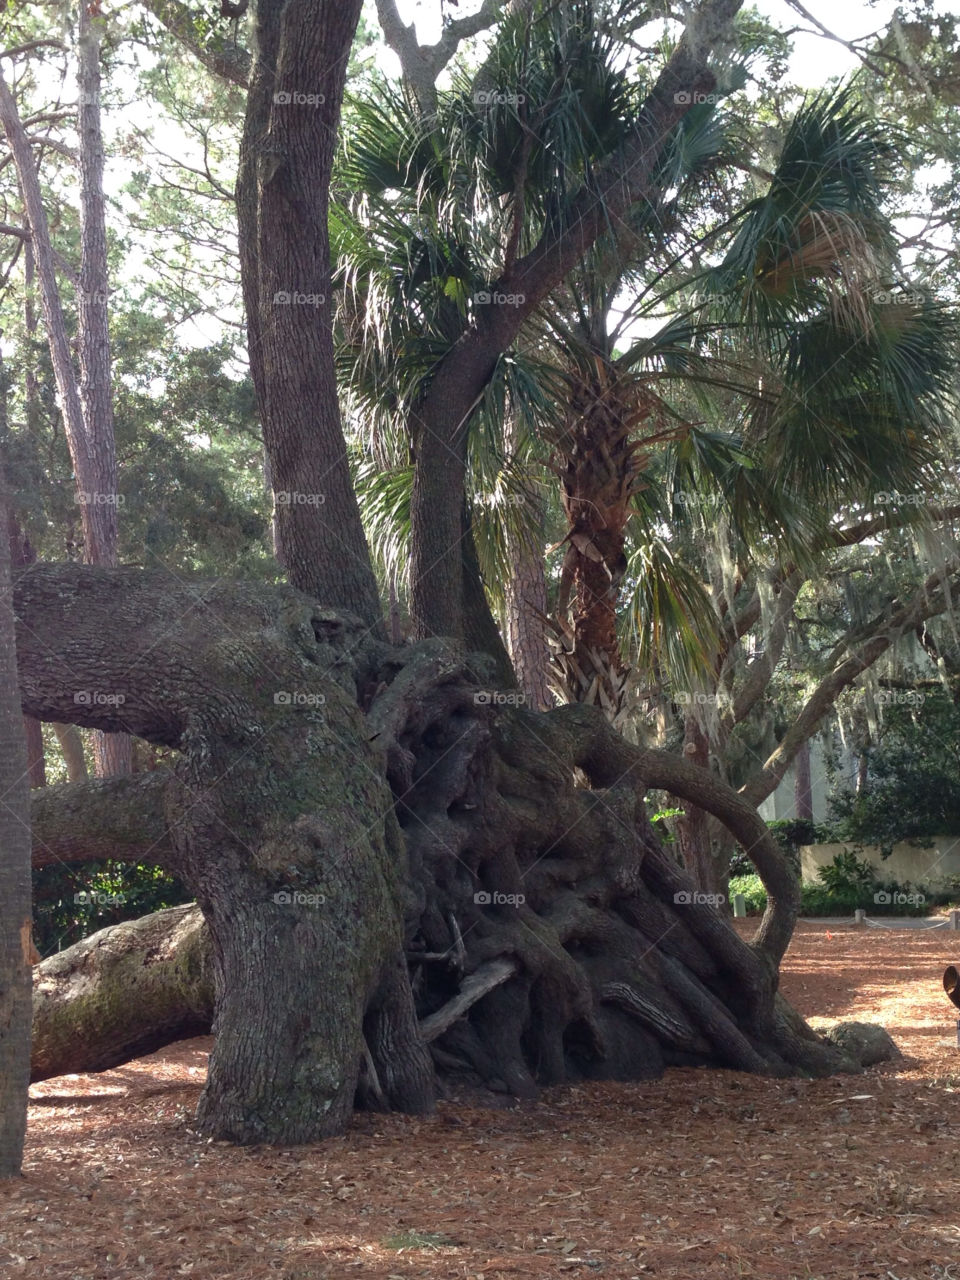 Strange tree with above-ground roots on Hilton Head Island in South